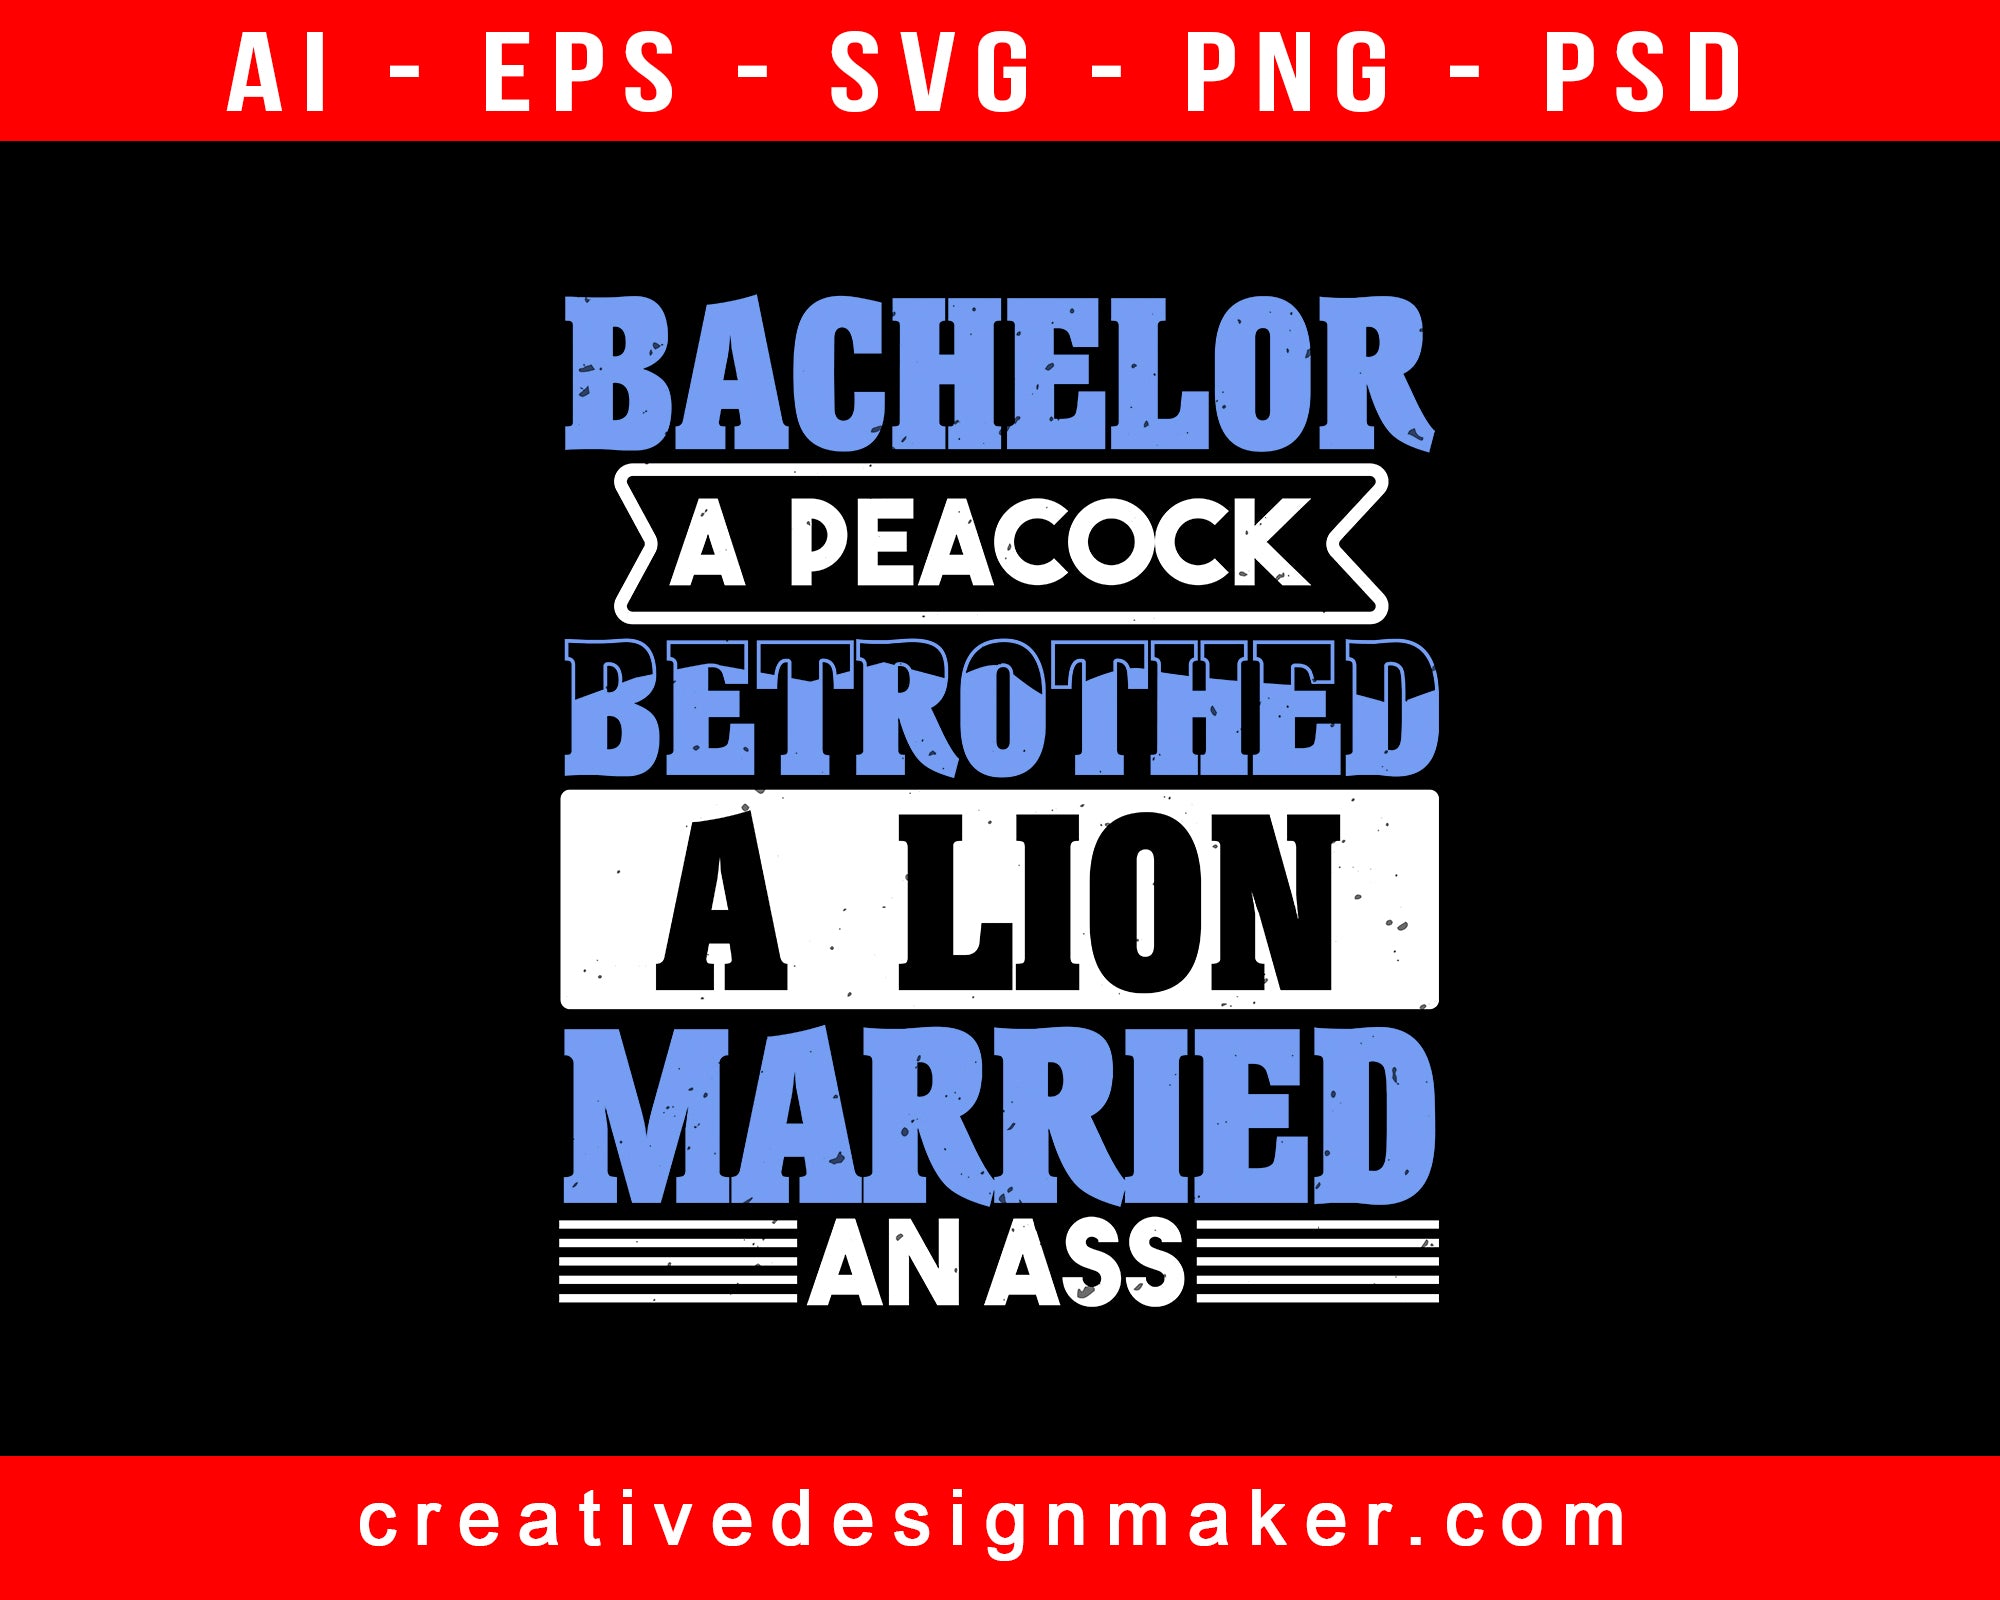 Bachelor, A Peacock; Betrothed, A Lion; Married, An Ass Party Print Ready Editable T-Shirt SVG Design!